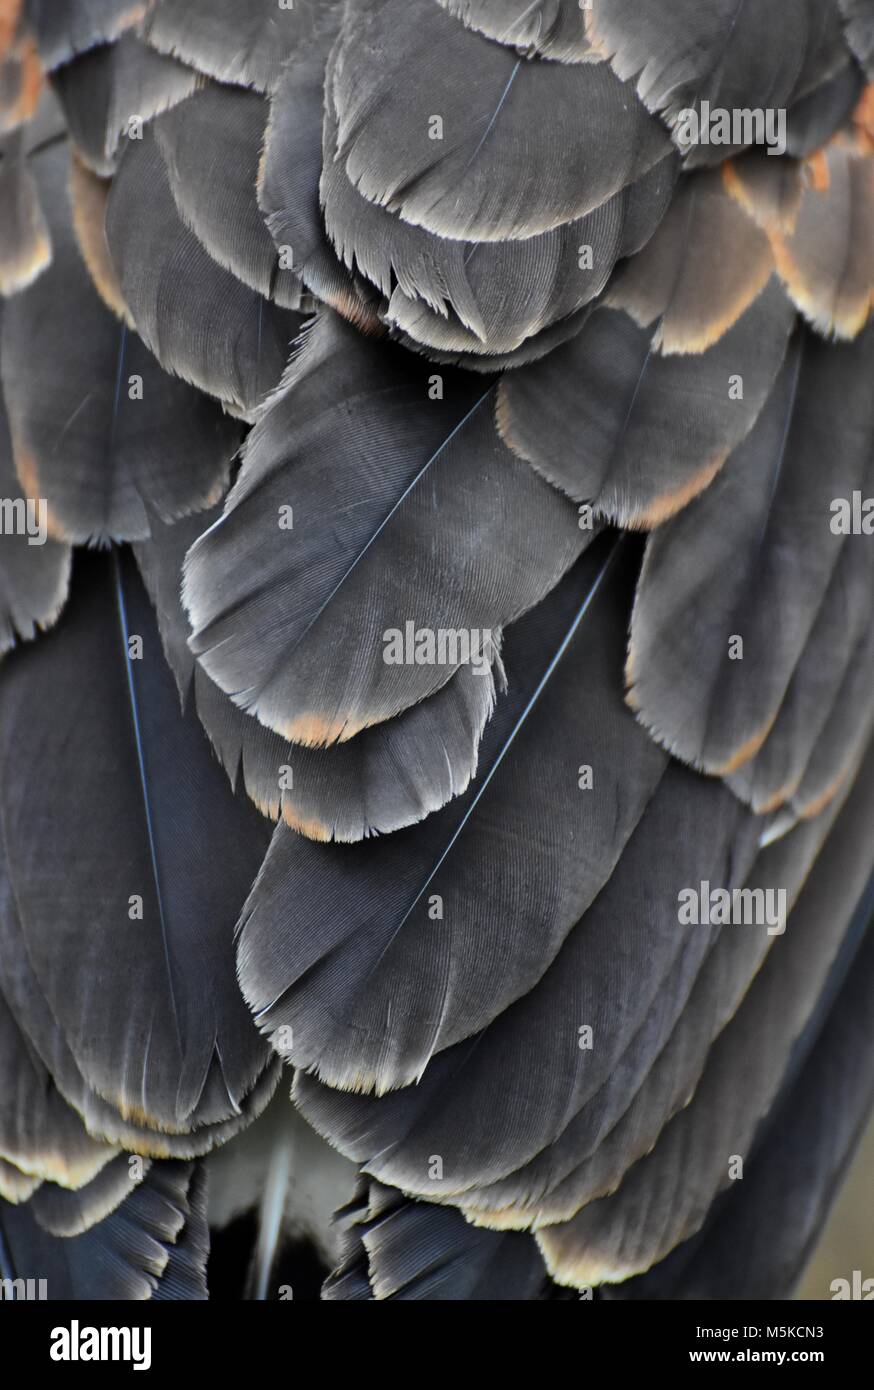 Macro photograph of the black feathers of a hawk. Stock Photo